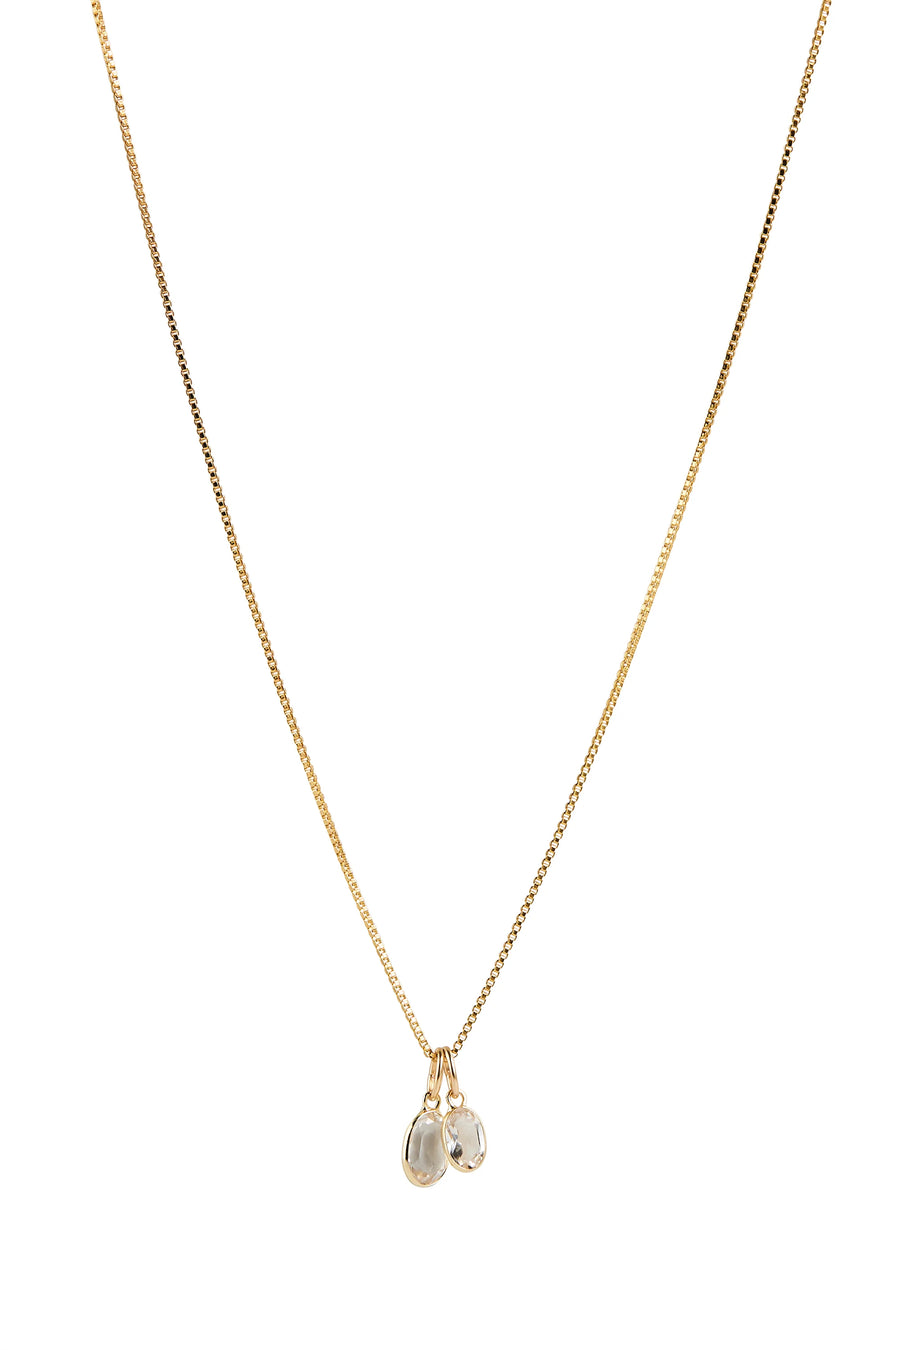 LISBETH JEWELRY - ALLO II NECKLACE - 14K GOLD FILLED